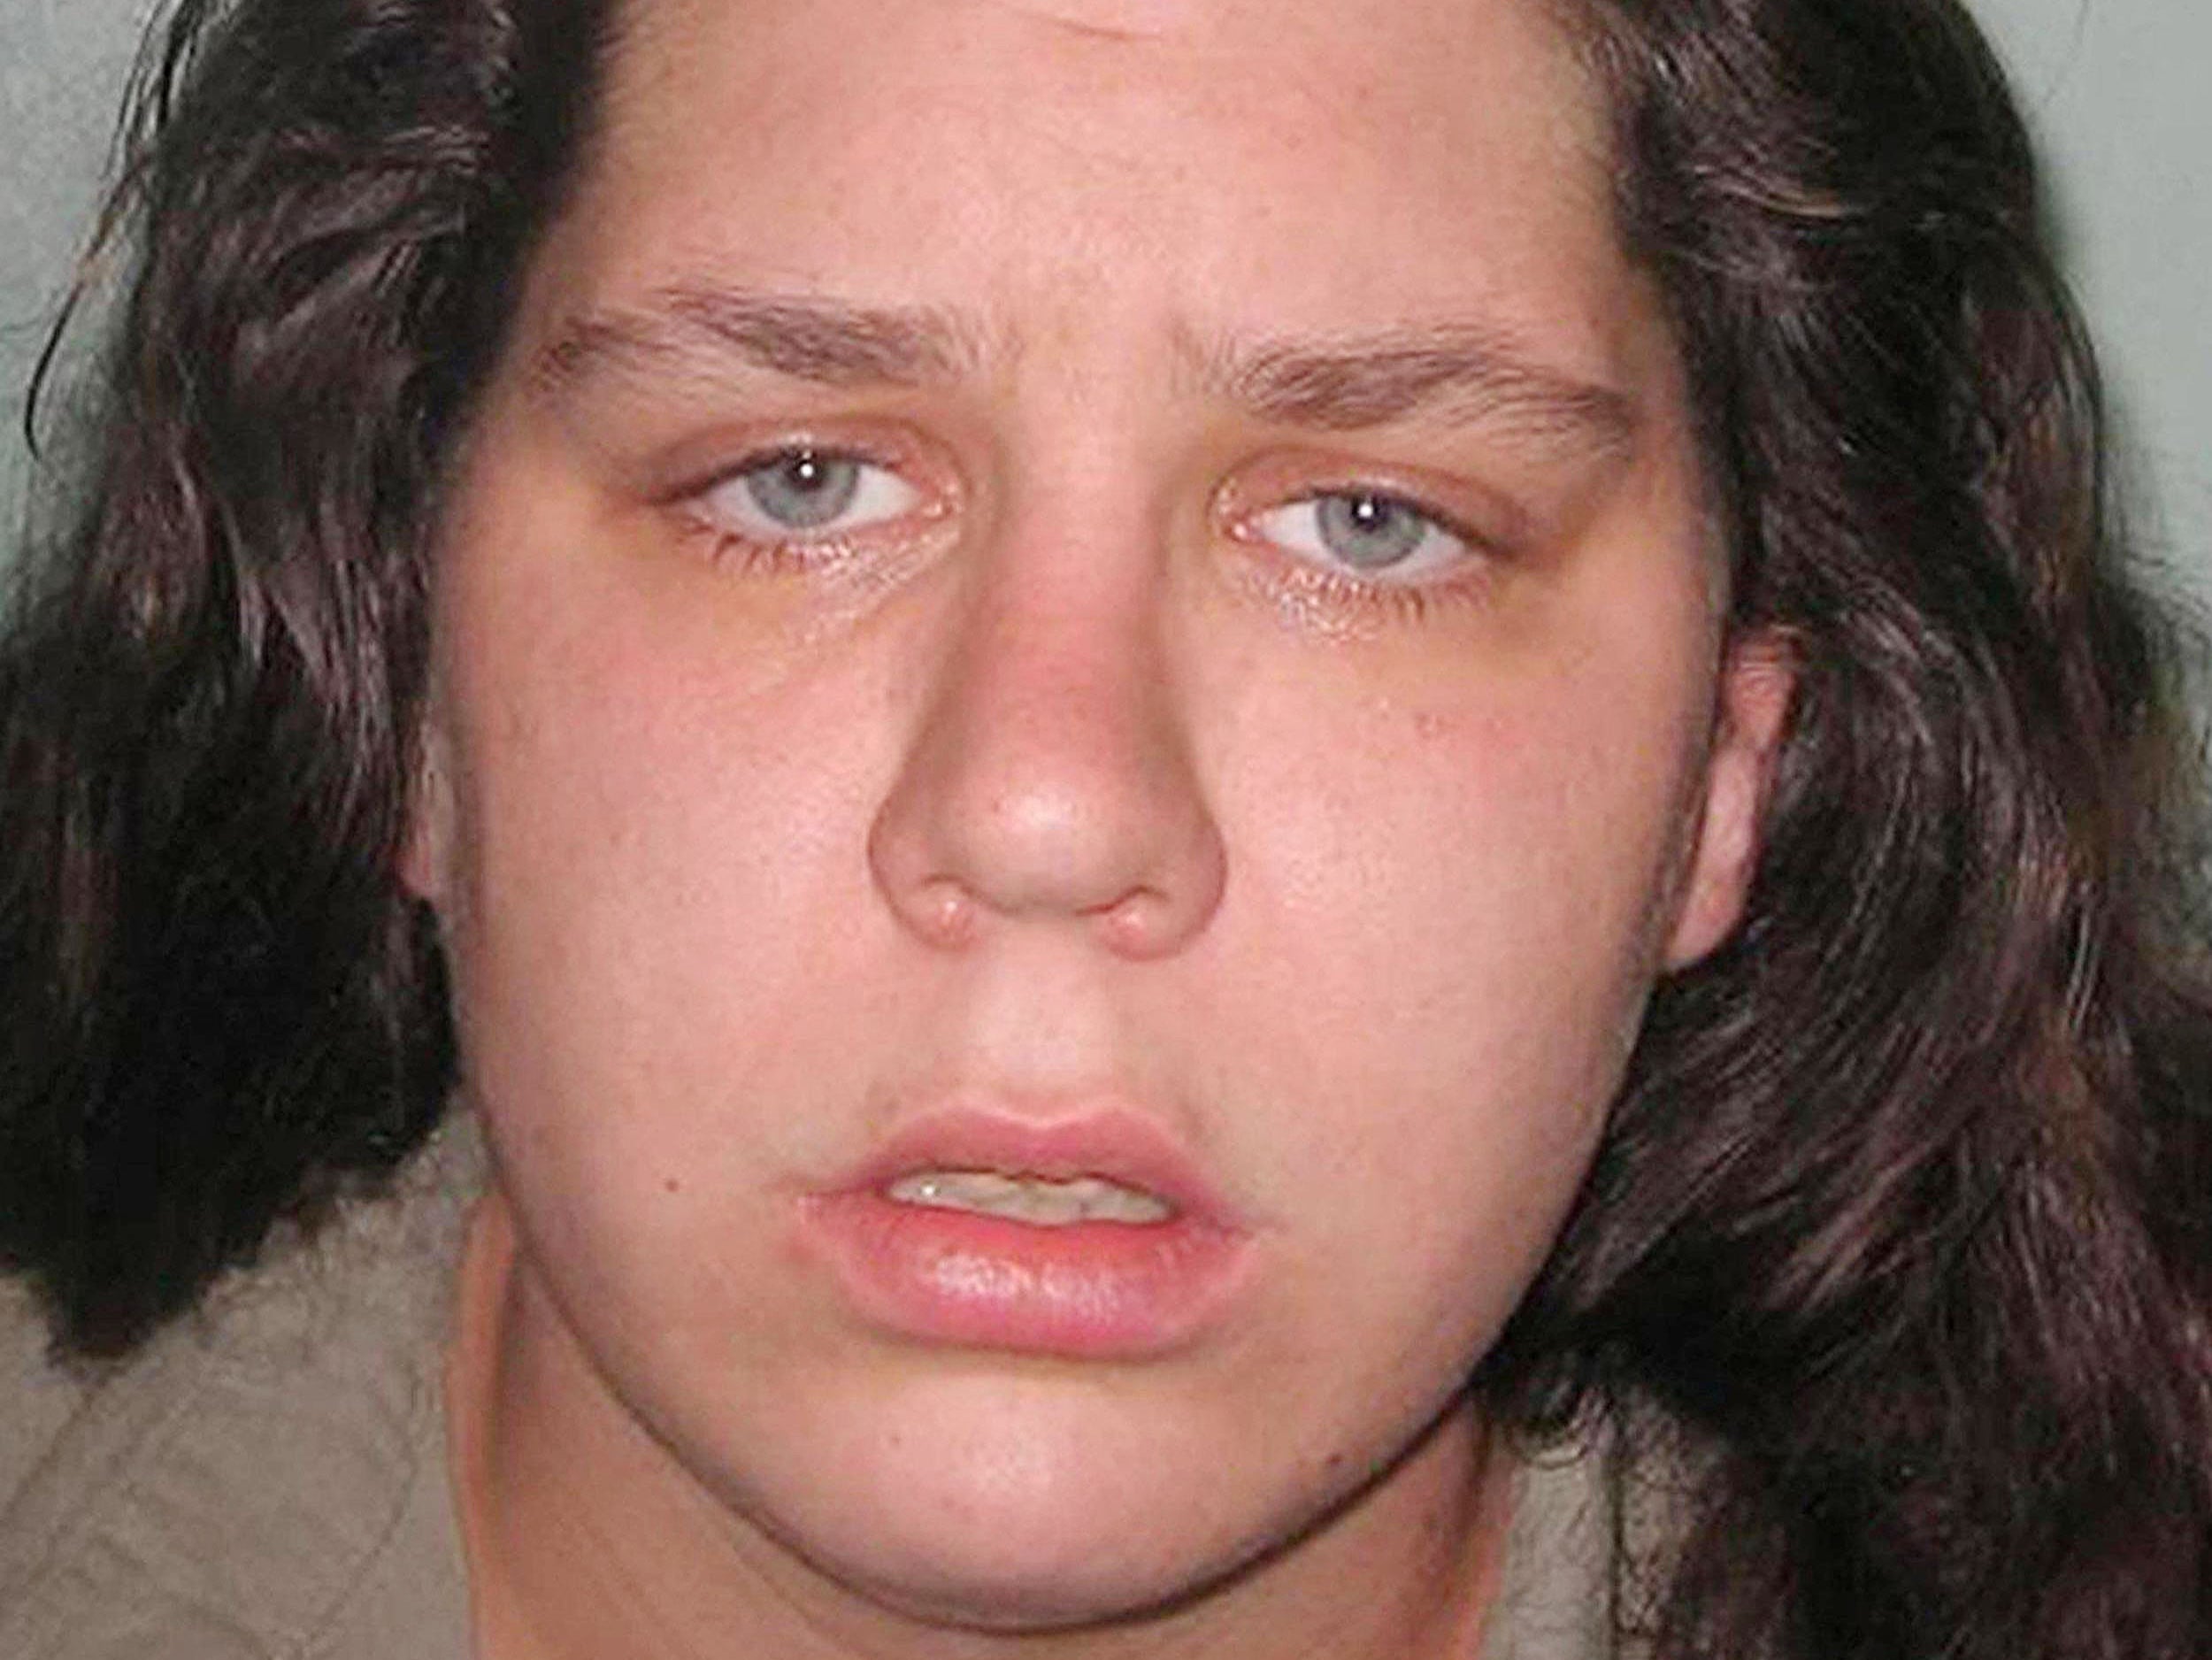 The Parole Board has decided Tracey Connelly, the mother of Baby P, who died after months of abuse, should be freed from jail